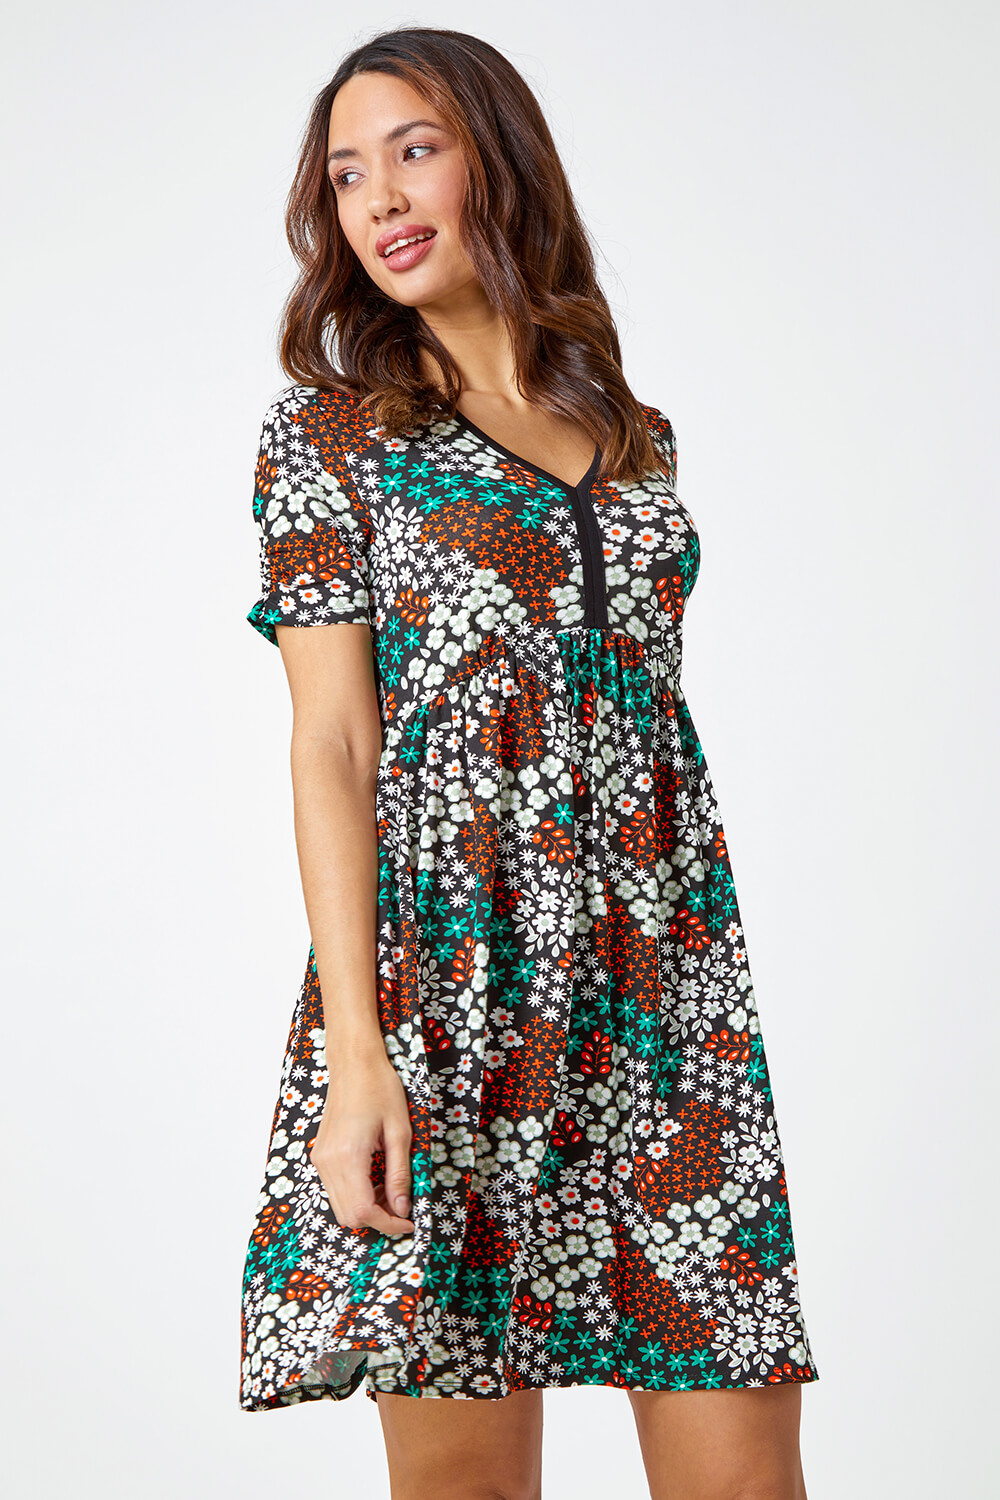 Green Floral Print Stretch Jersey Dress, Image 2 of 5